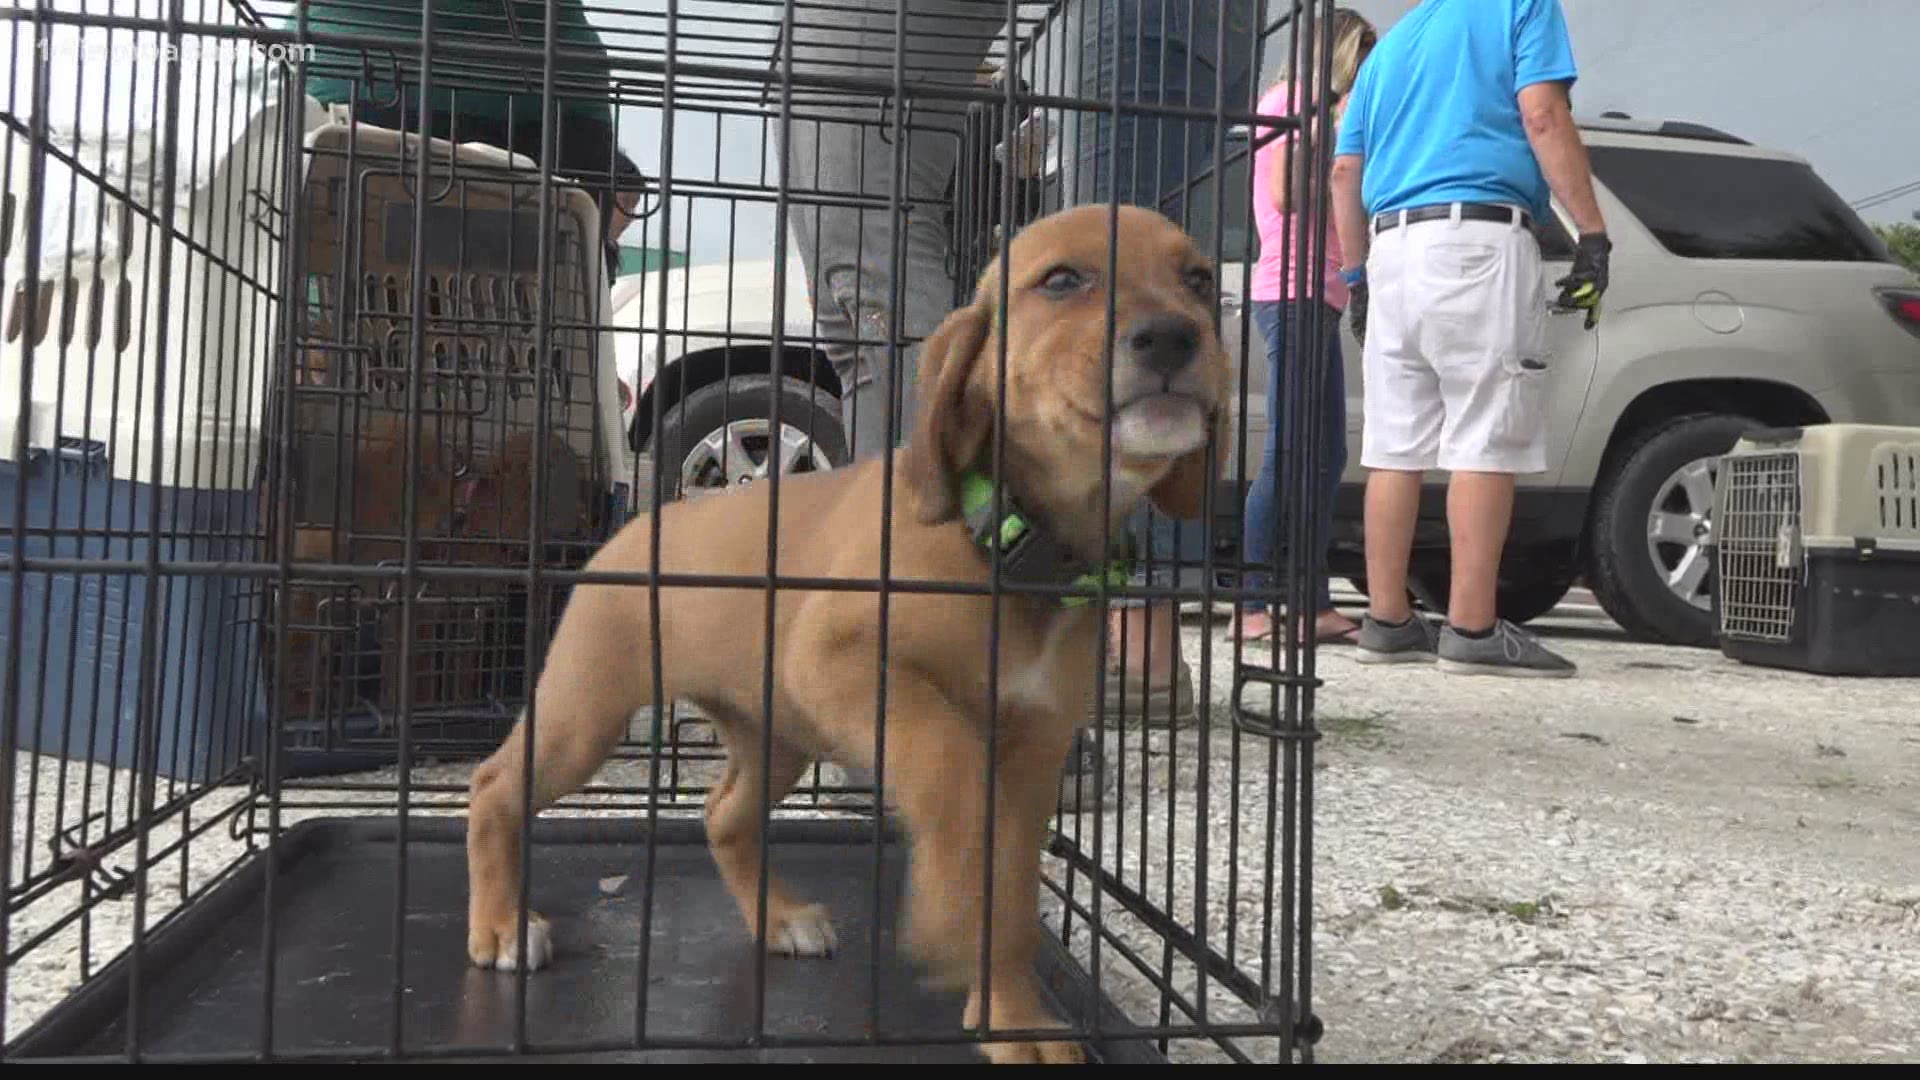 Compassion Kind is saving animals from areas hit by Hurricane Laura and they're shifting their efforts to areas affected by Hurricane Sally next.